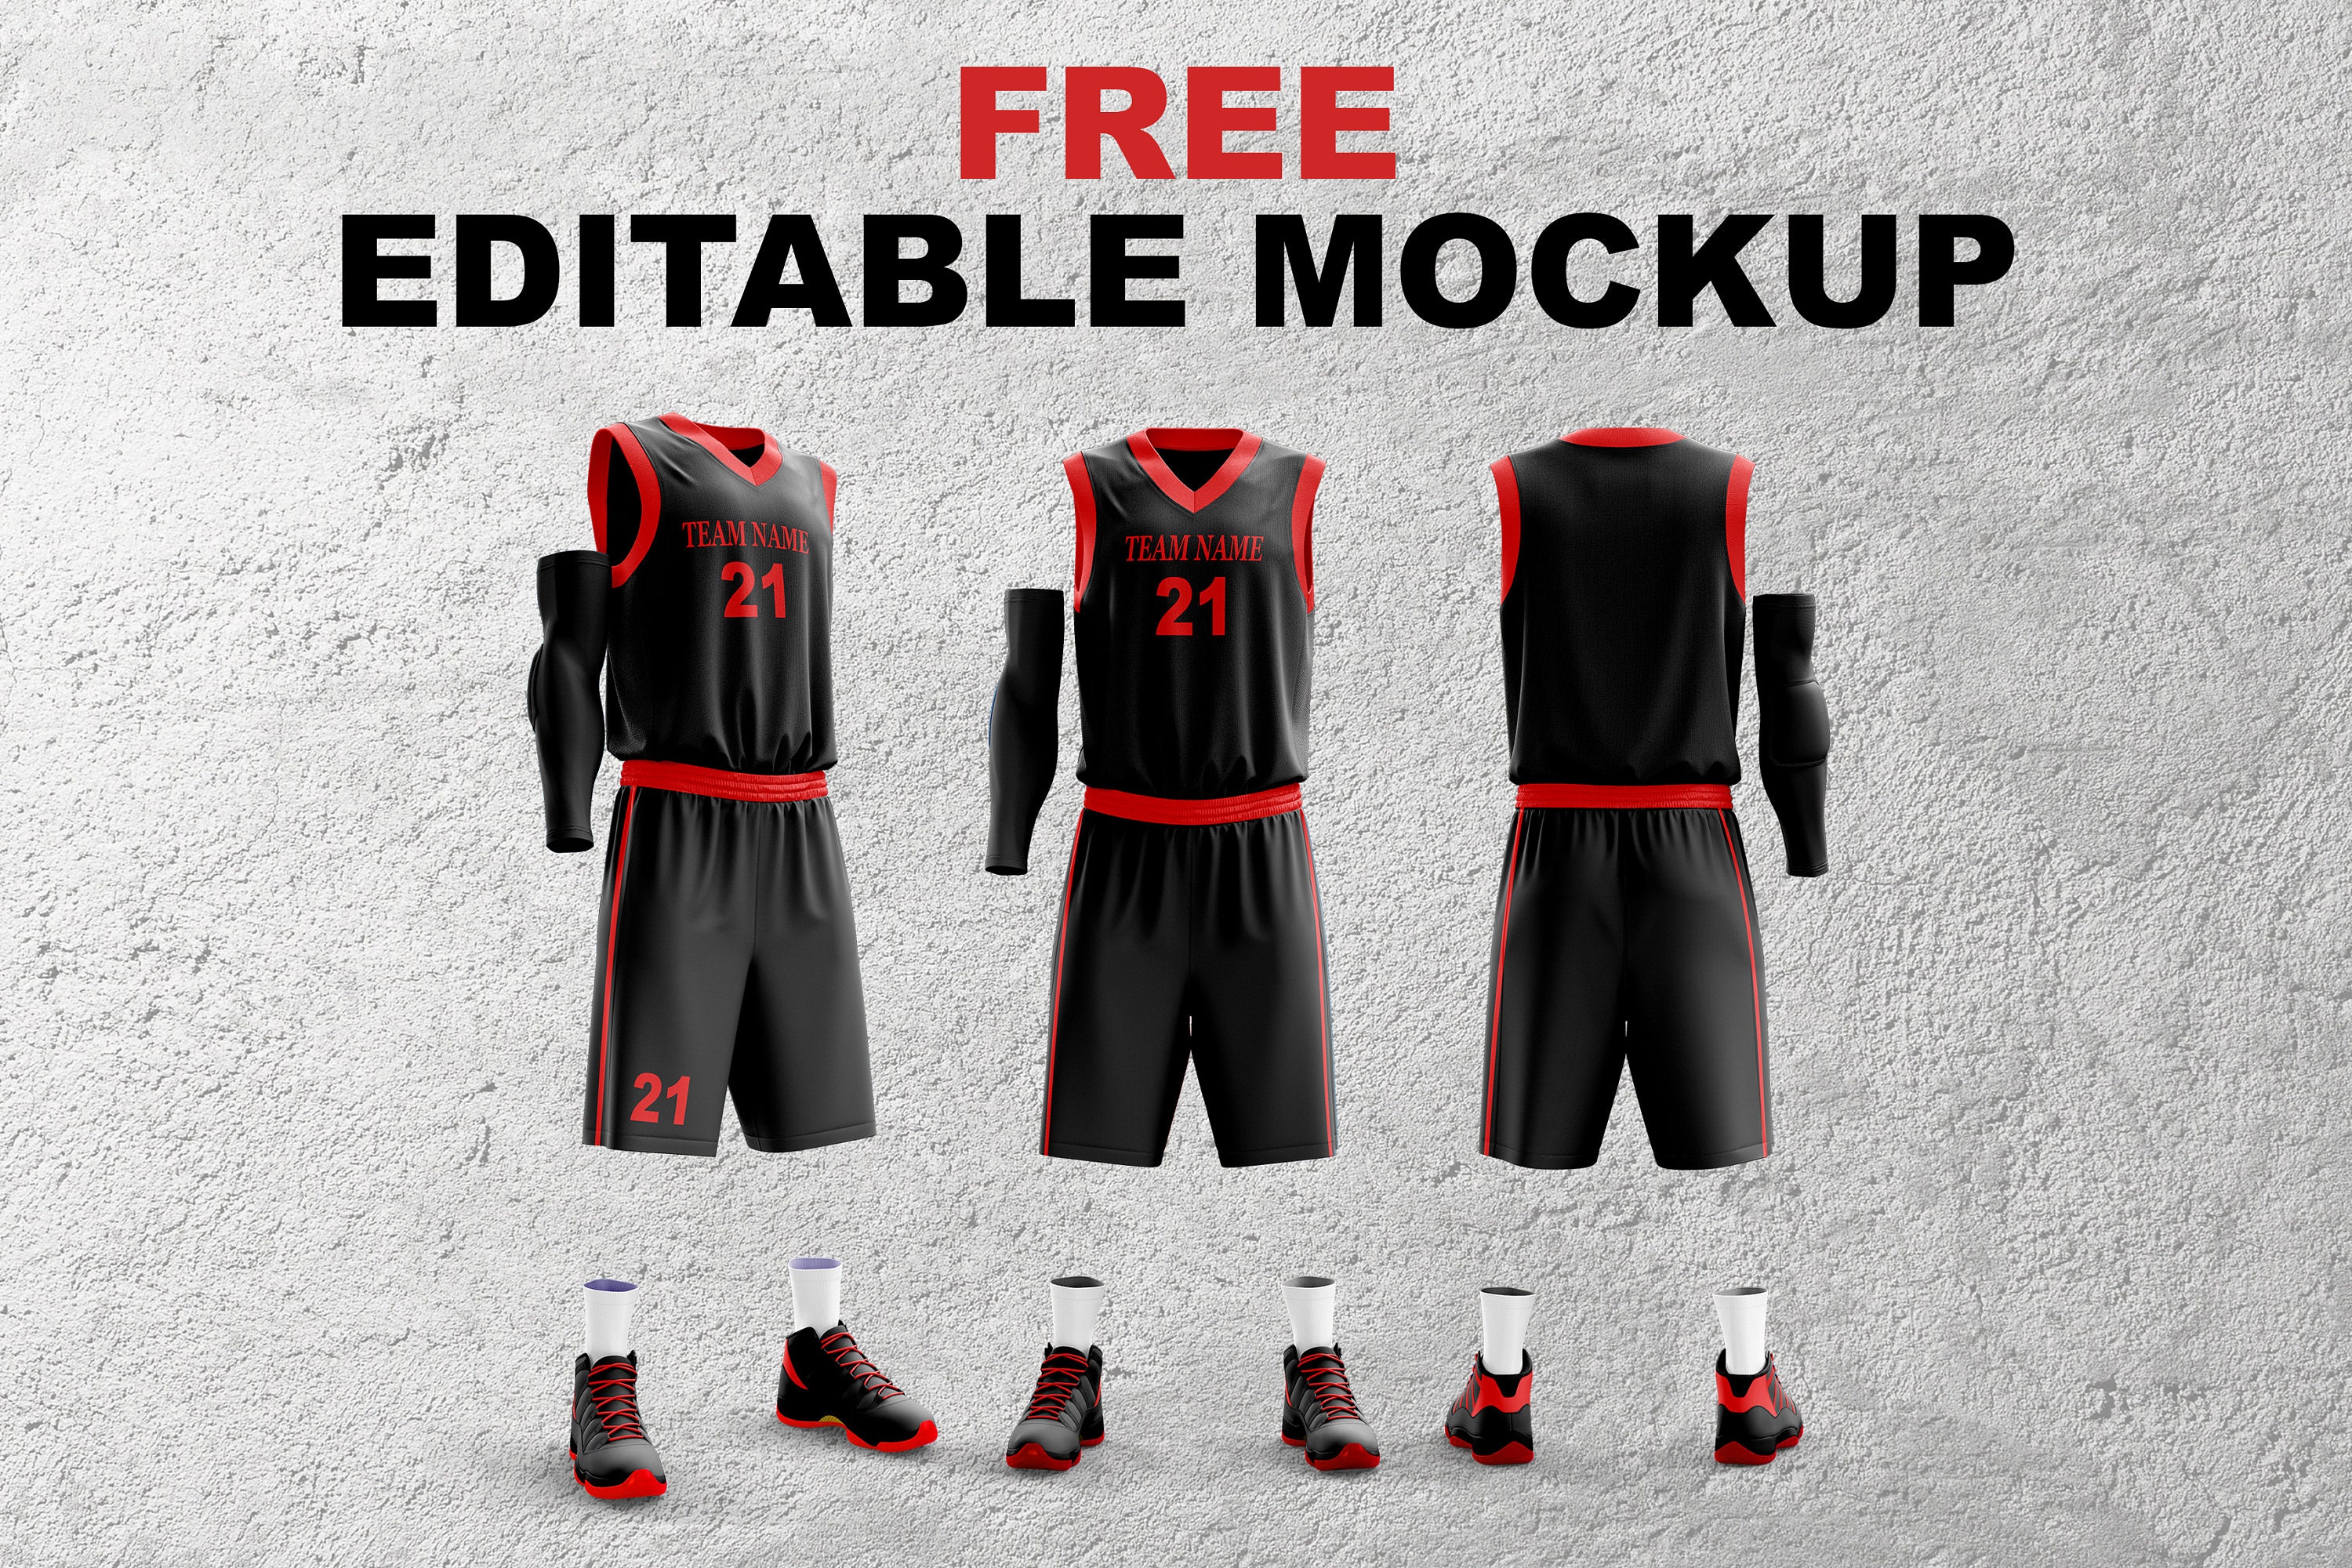 Design basketball sublimation jersey or jersey design by Erwinfabiala